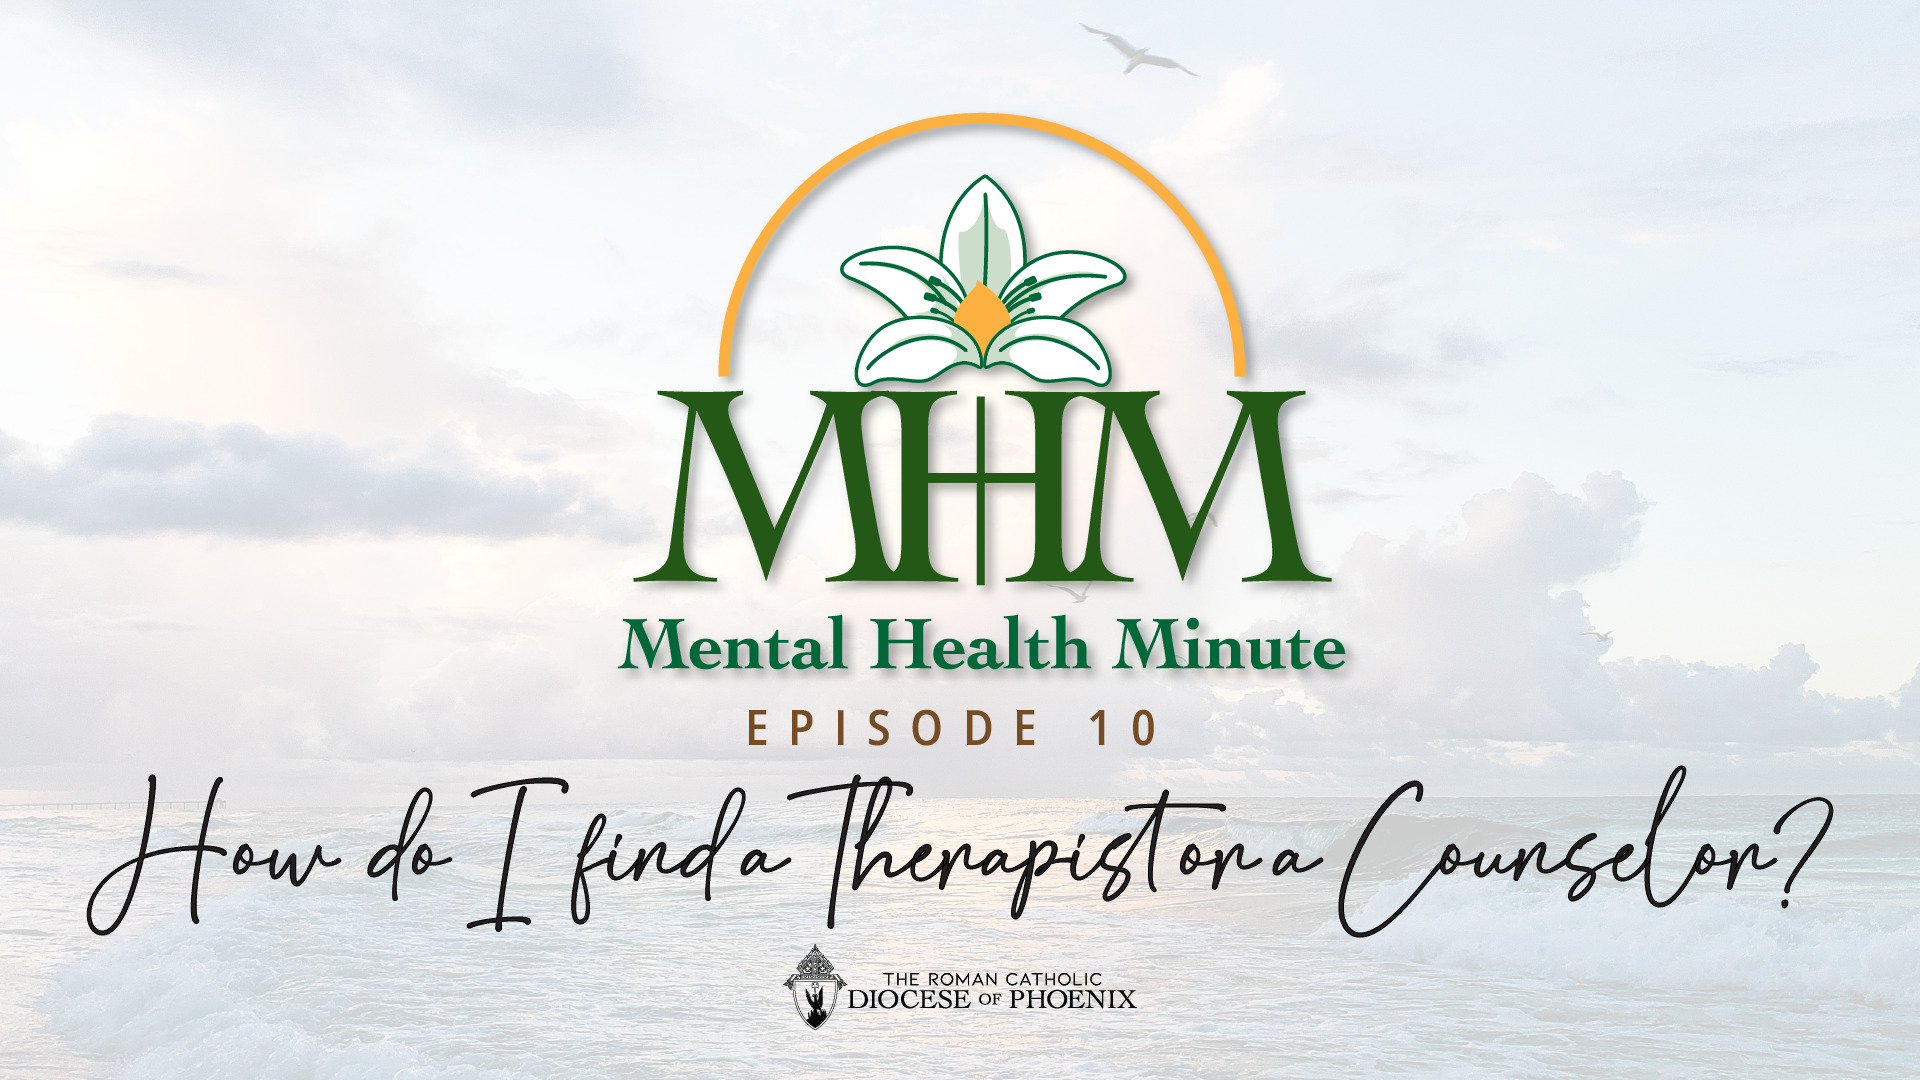 Mental Health Minute Episode 10: How do I find a therapist or a counselor?